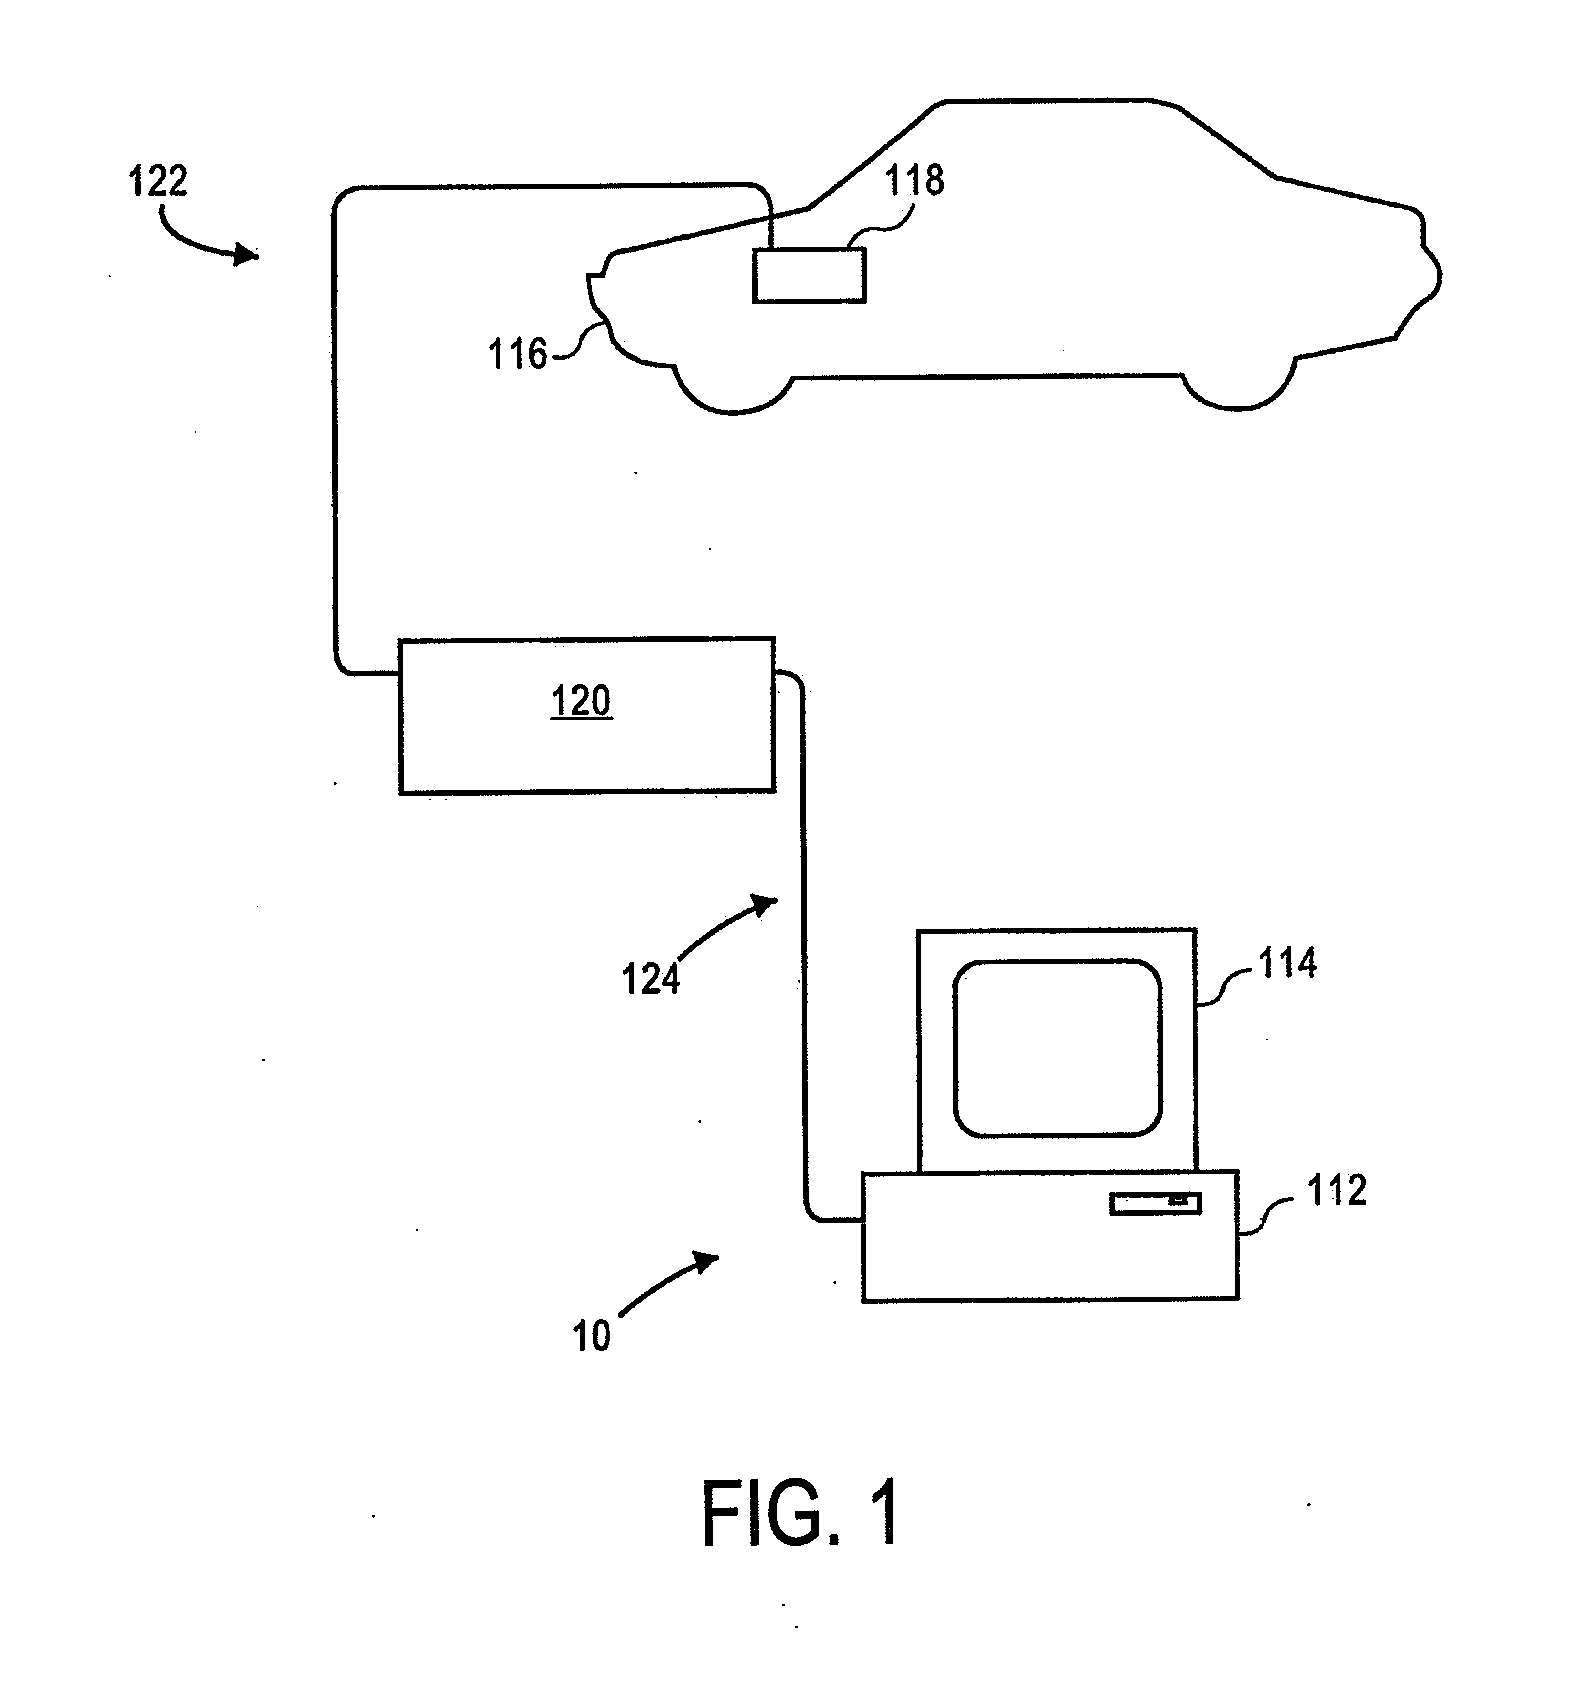 Dynamic decision sequencing method and apparatus for optimiing a diagnostic test plan